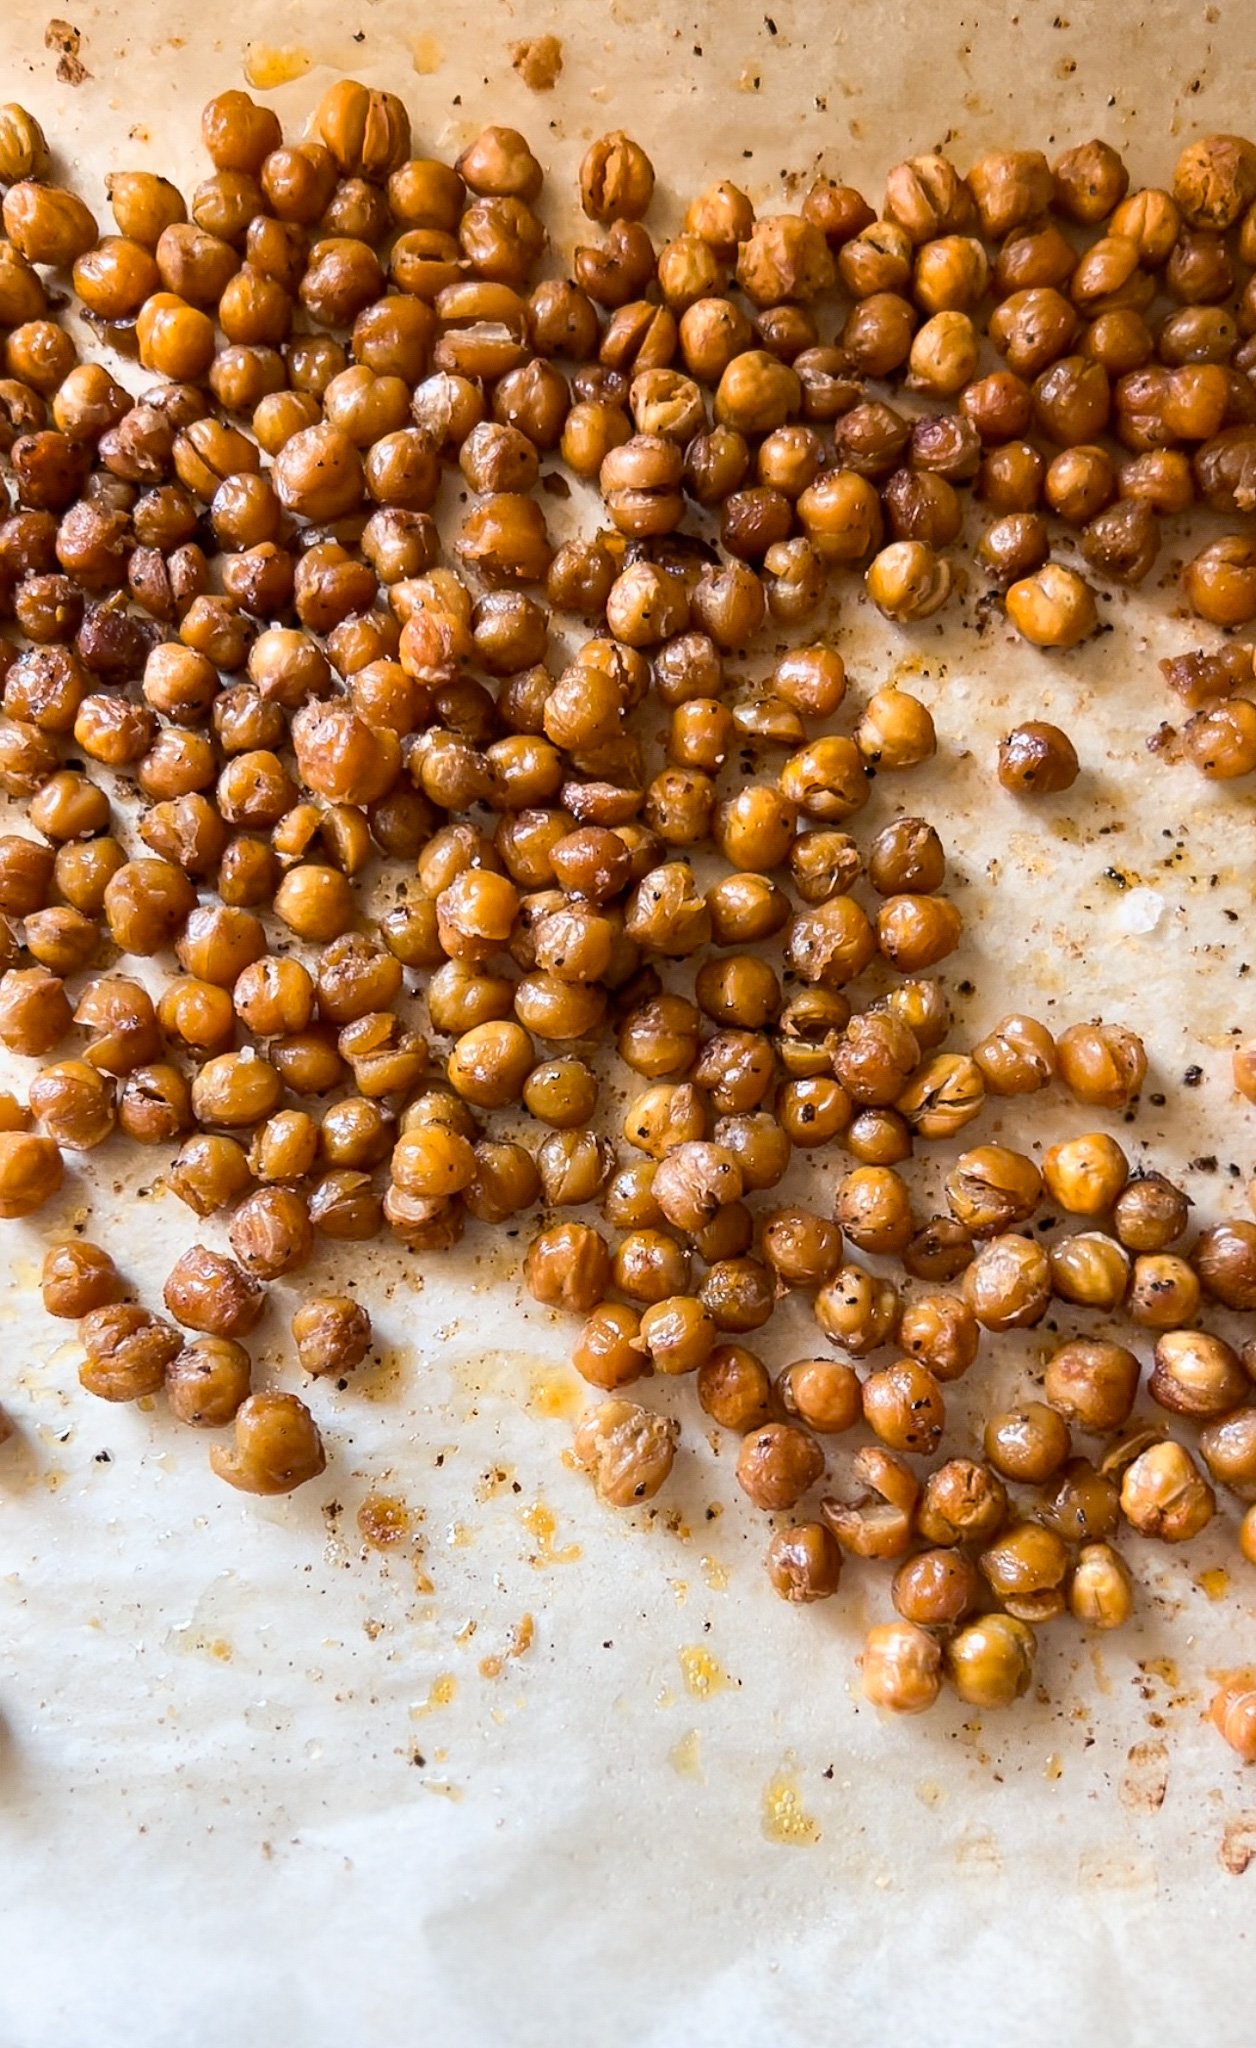 A rimmed baking sheet is lined with crispy roast chickpeas from the oven.